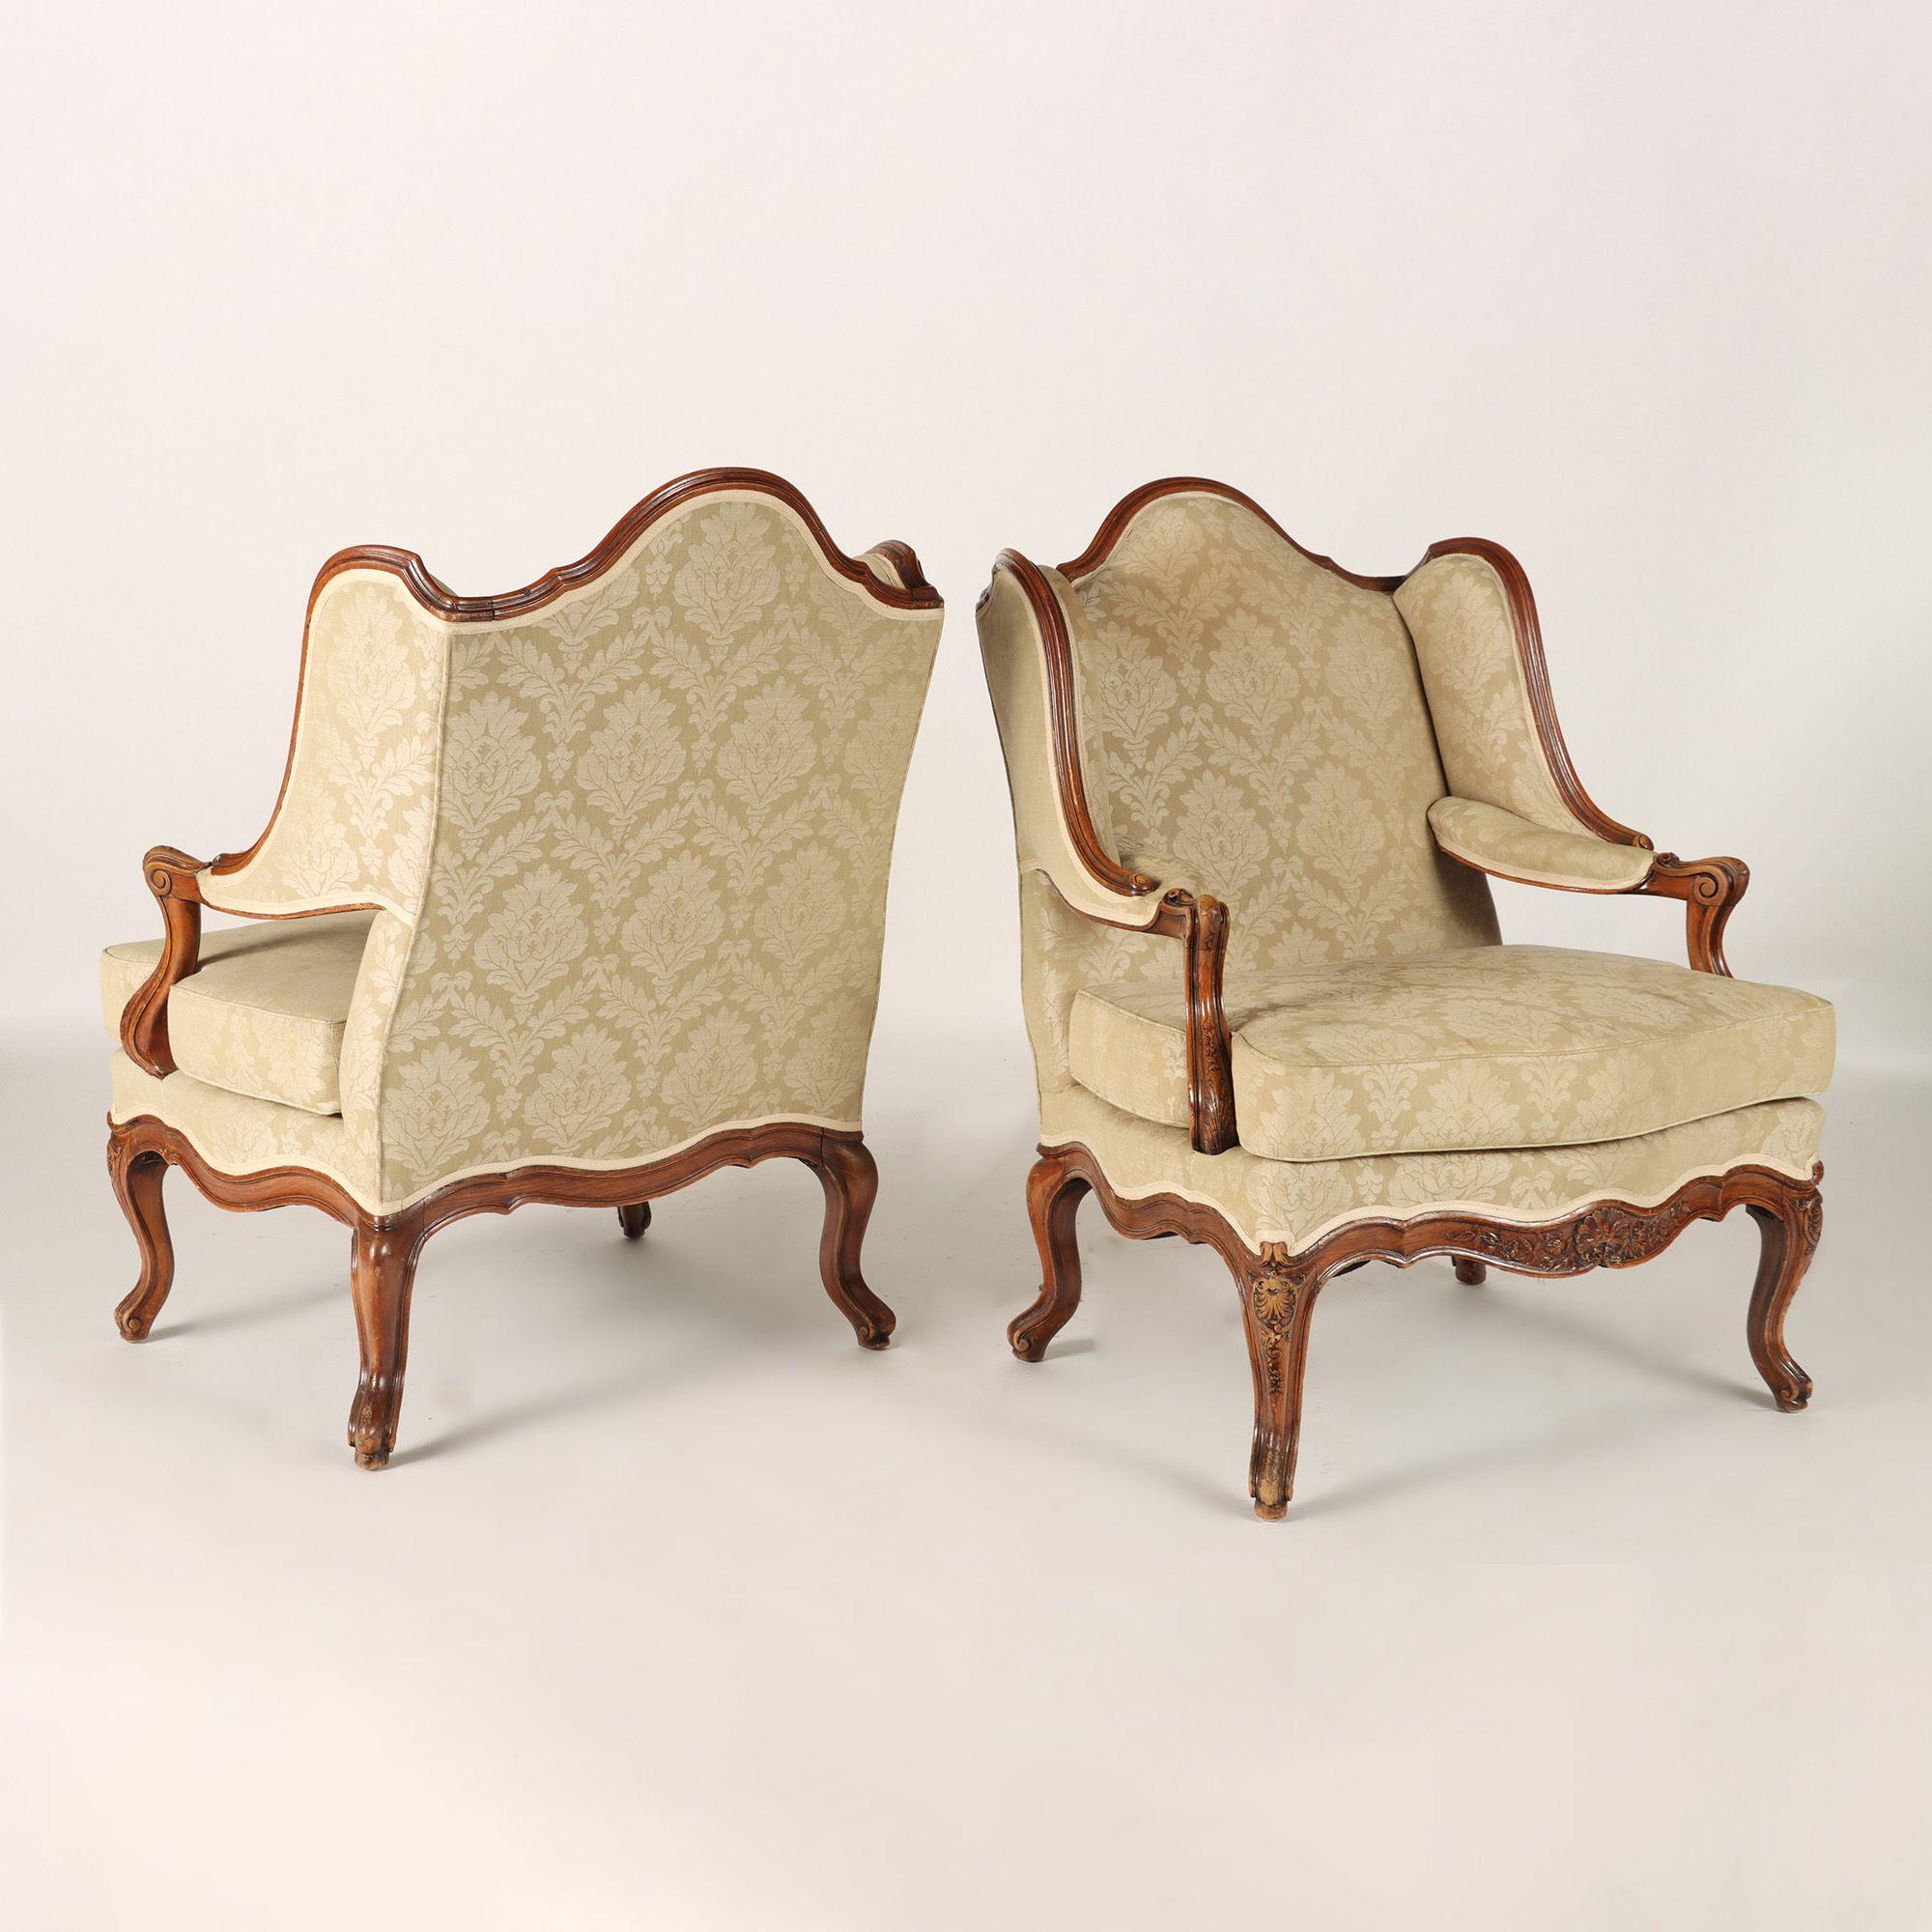 A pair of French Louis XV style carved Bergeres A oreilles, padded arms and cabriole legs, upholstered in beige colored damask. C 1900. Hard to find.